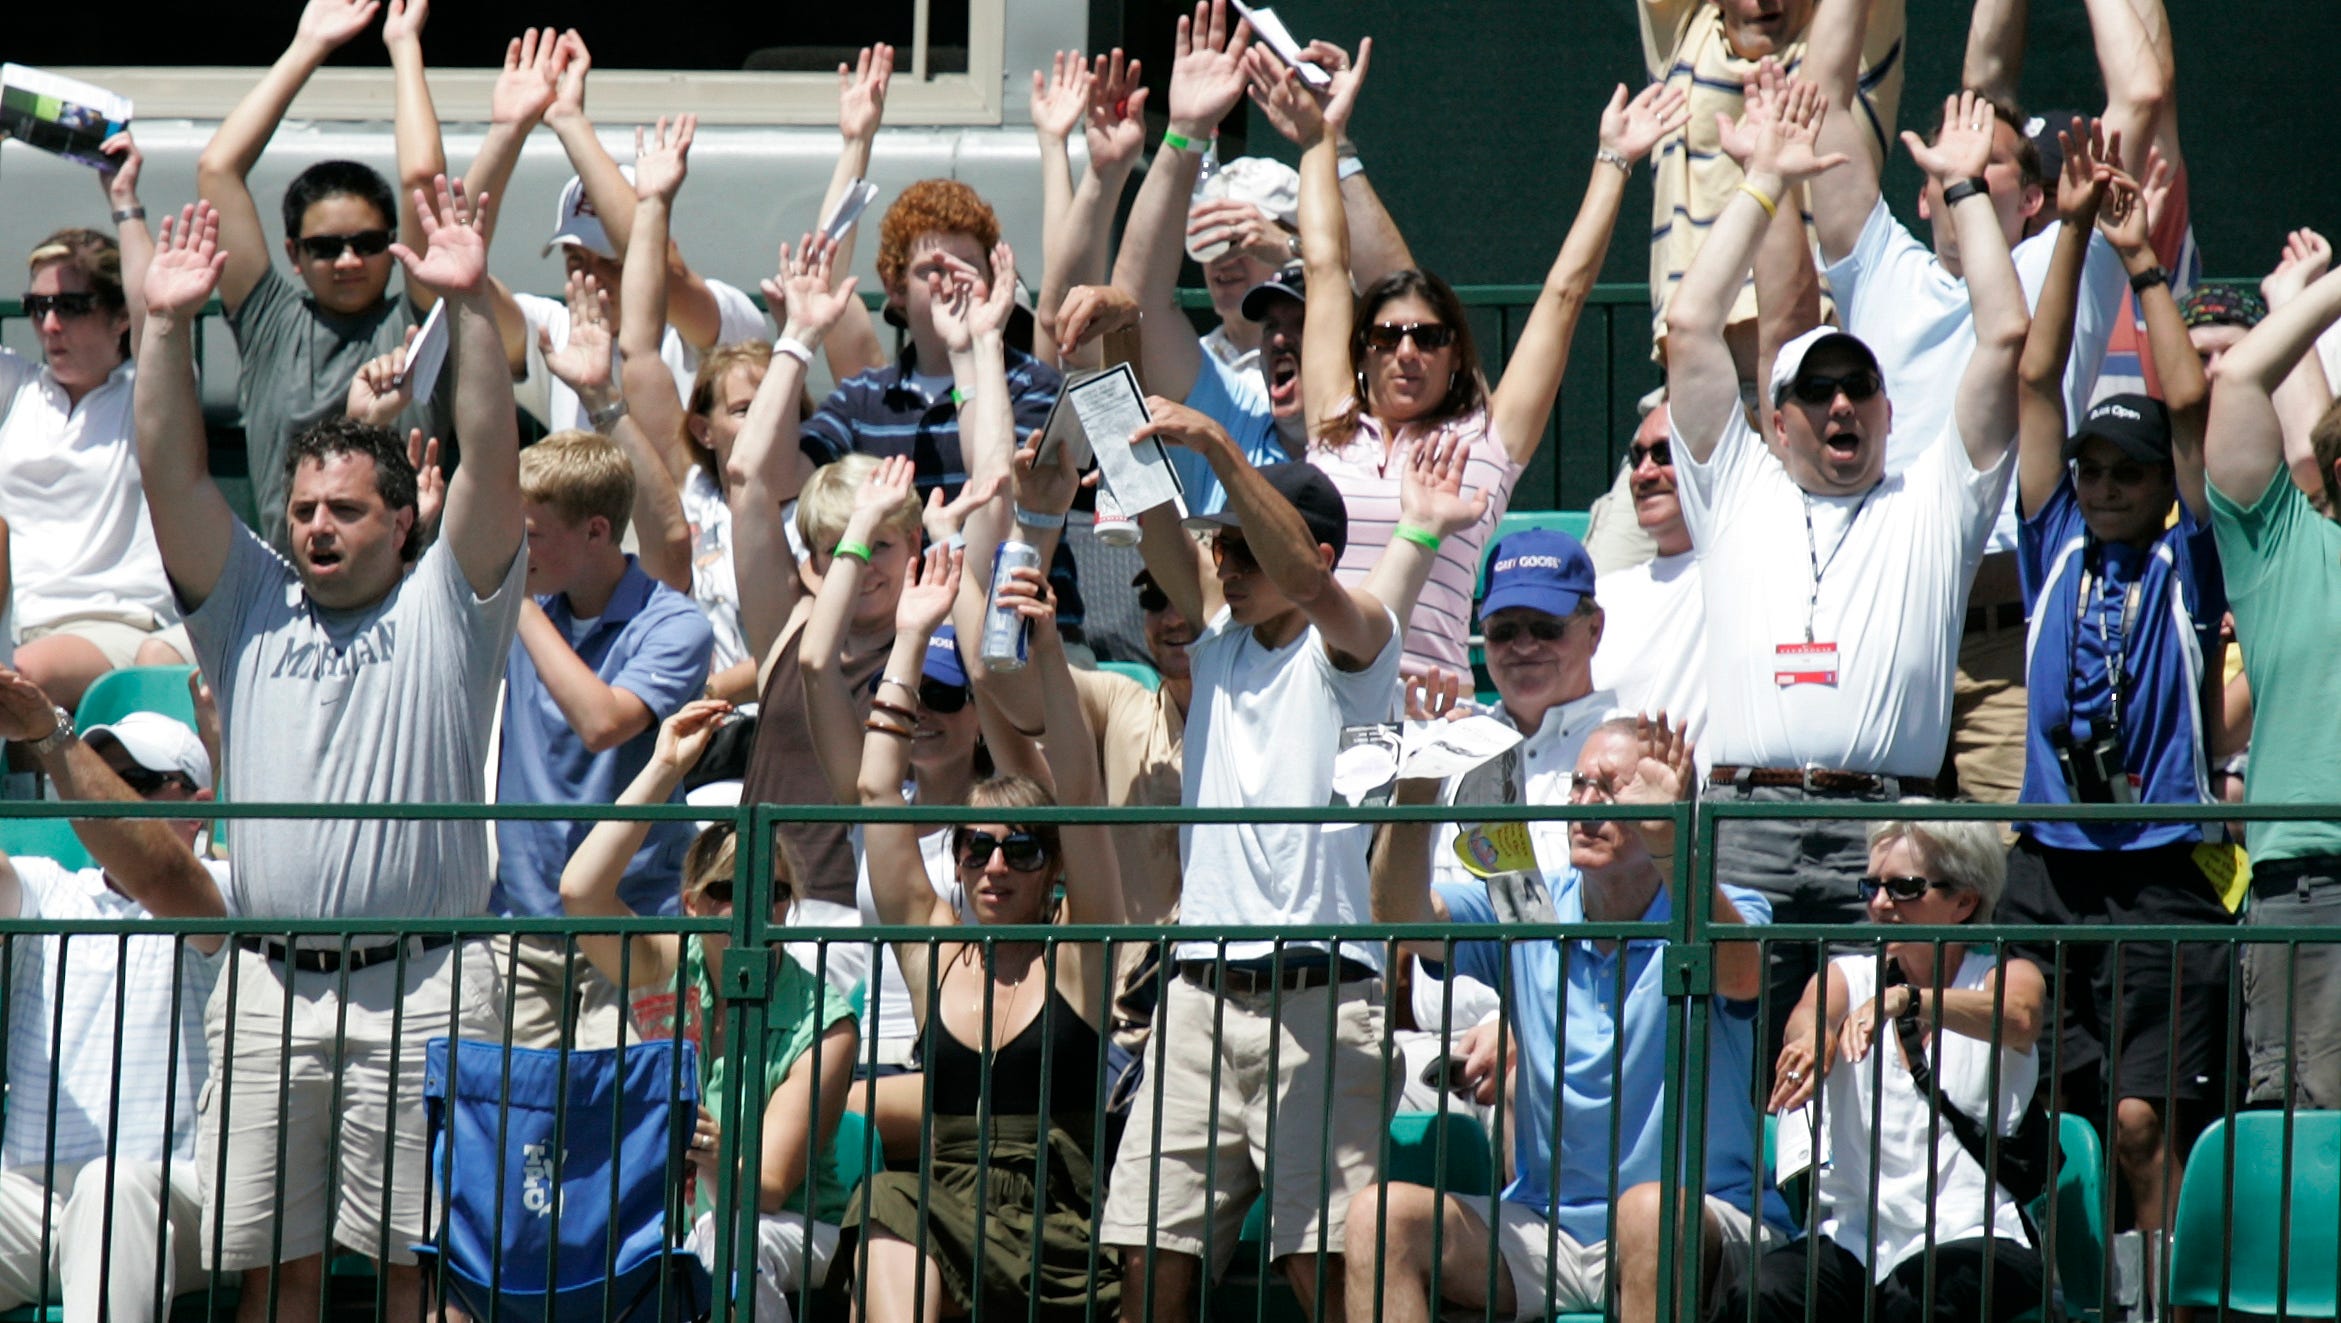 Fans surrounding the 17th green get the wave going during a break in the action during the 2008 Buick Open.